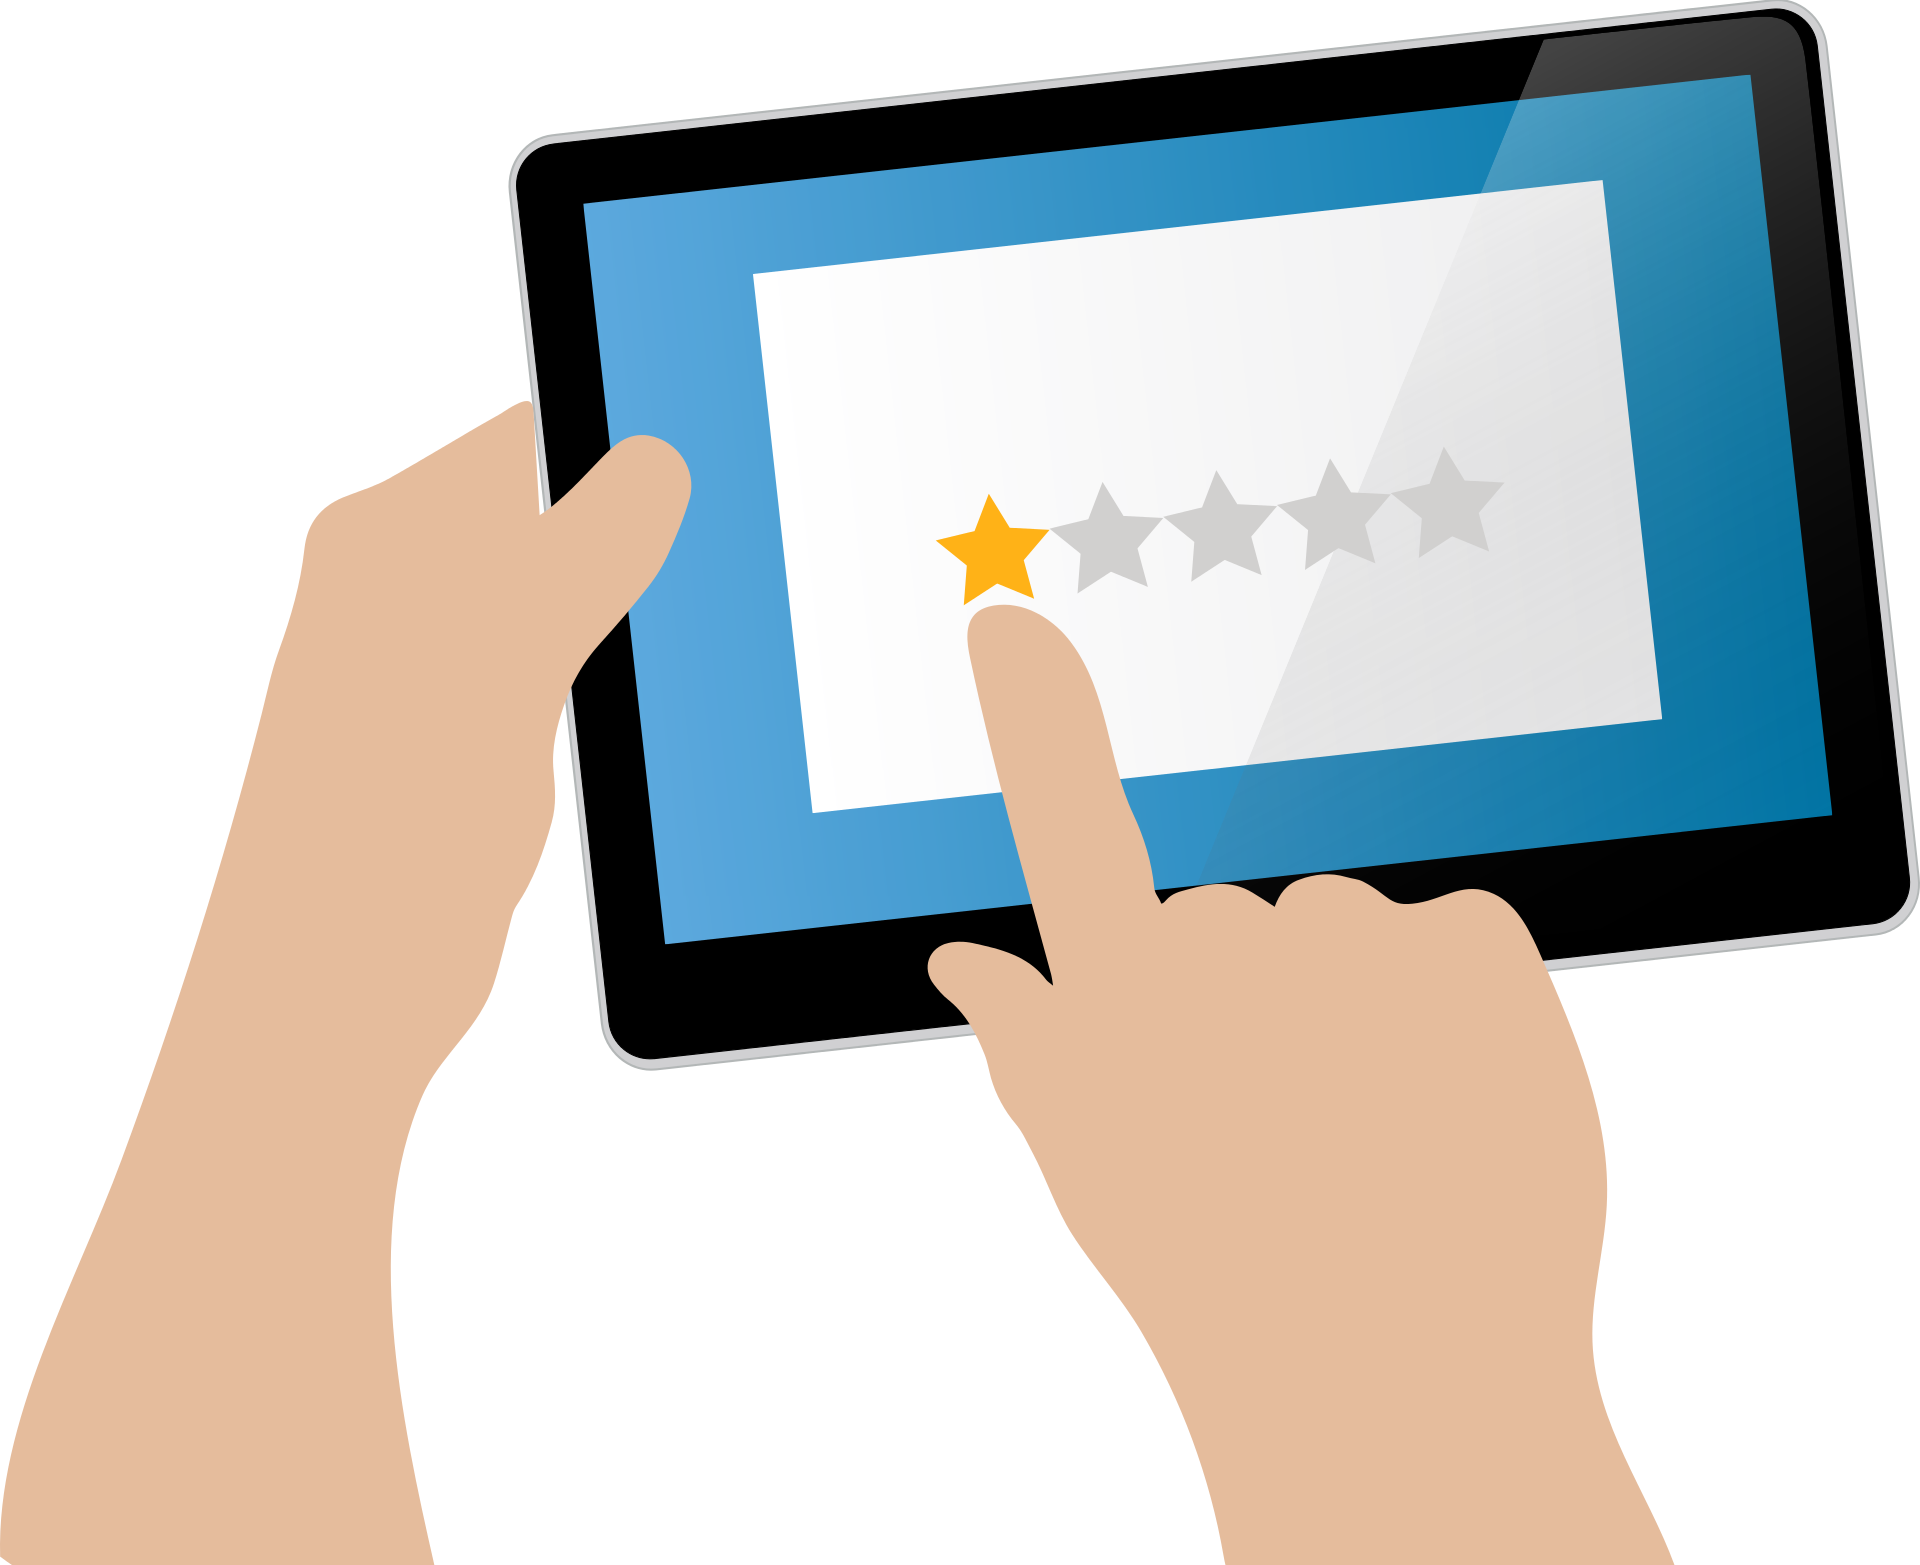 A drawing of two hands leaving a one-star review on a tablet, published to: "3 Ways Small Businesses Get Better Google Reviews"